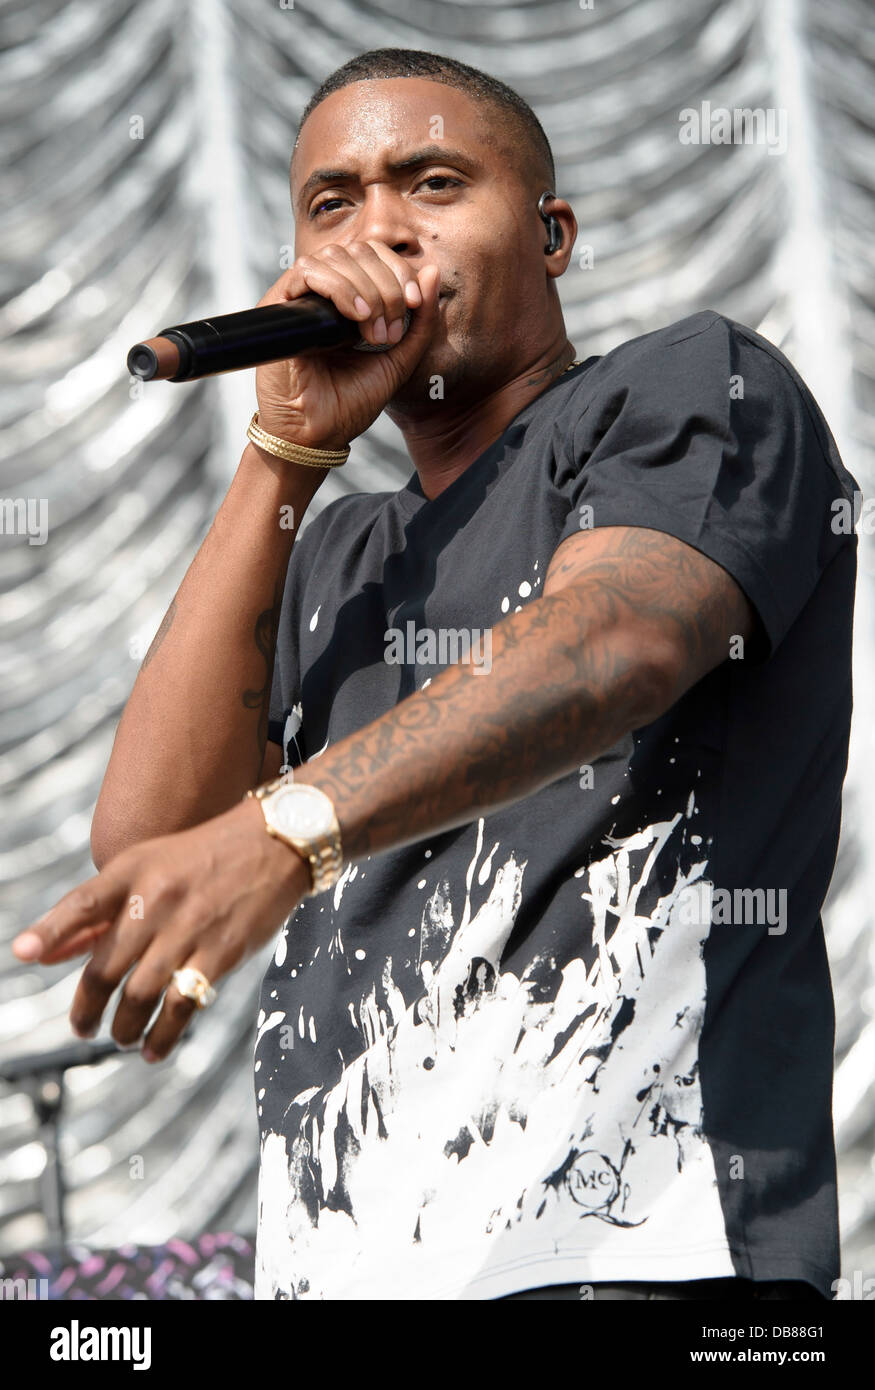 U.S singer, Nas performs on stage during the Wireless Festival at the Queen Elizabeth Olympic Park, London. Stock Photo